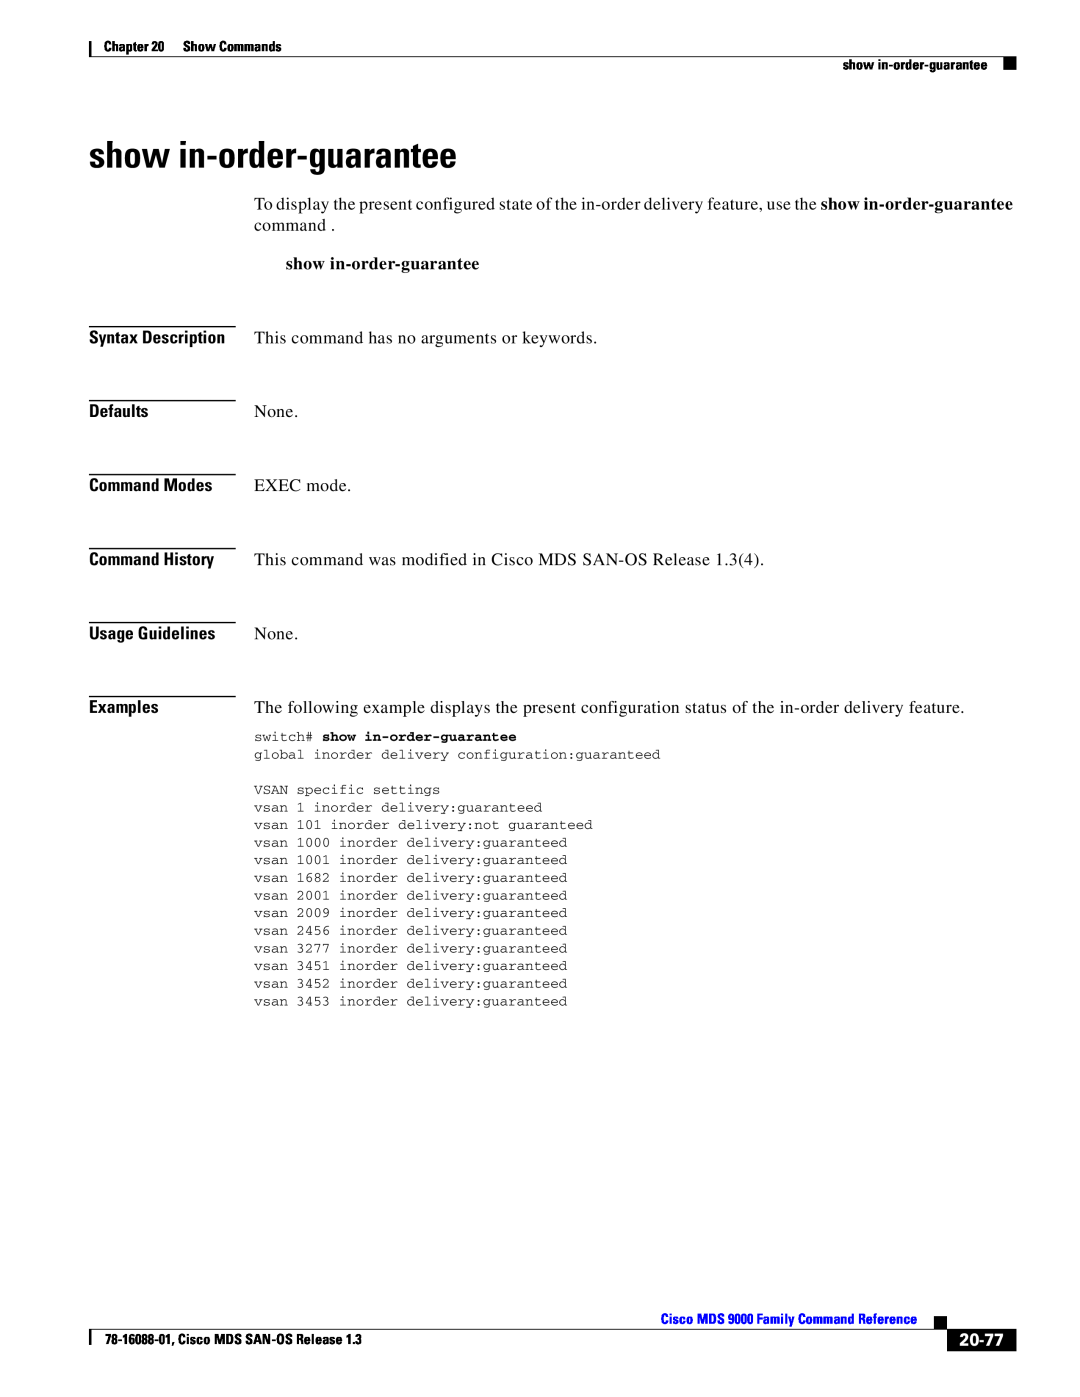 Cisco Systems MDS 9000 manual show in-order-guarantee, 20-77, Defaults, Command Modes, Usage Guidelines, Examples 